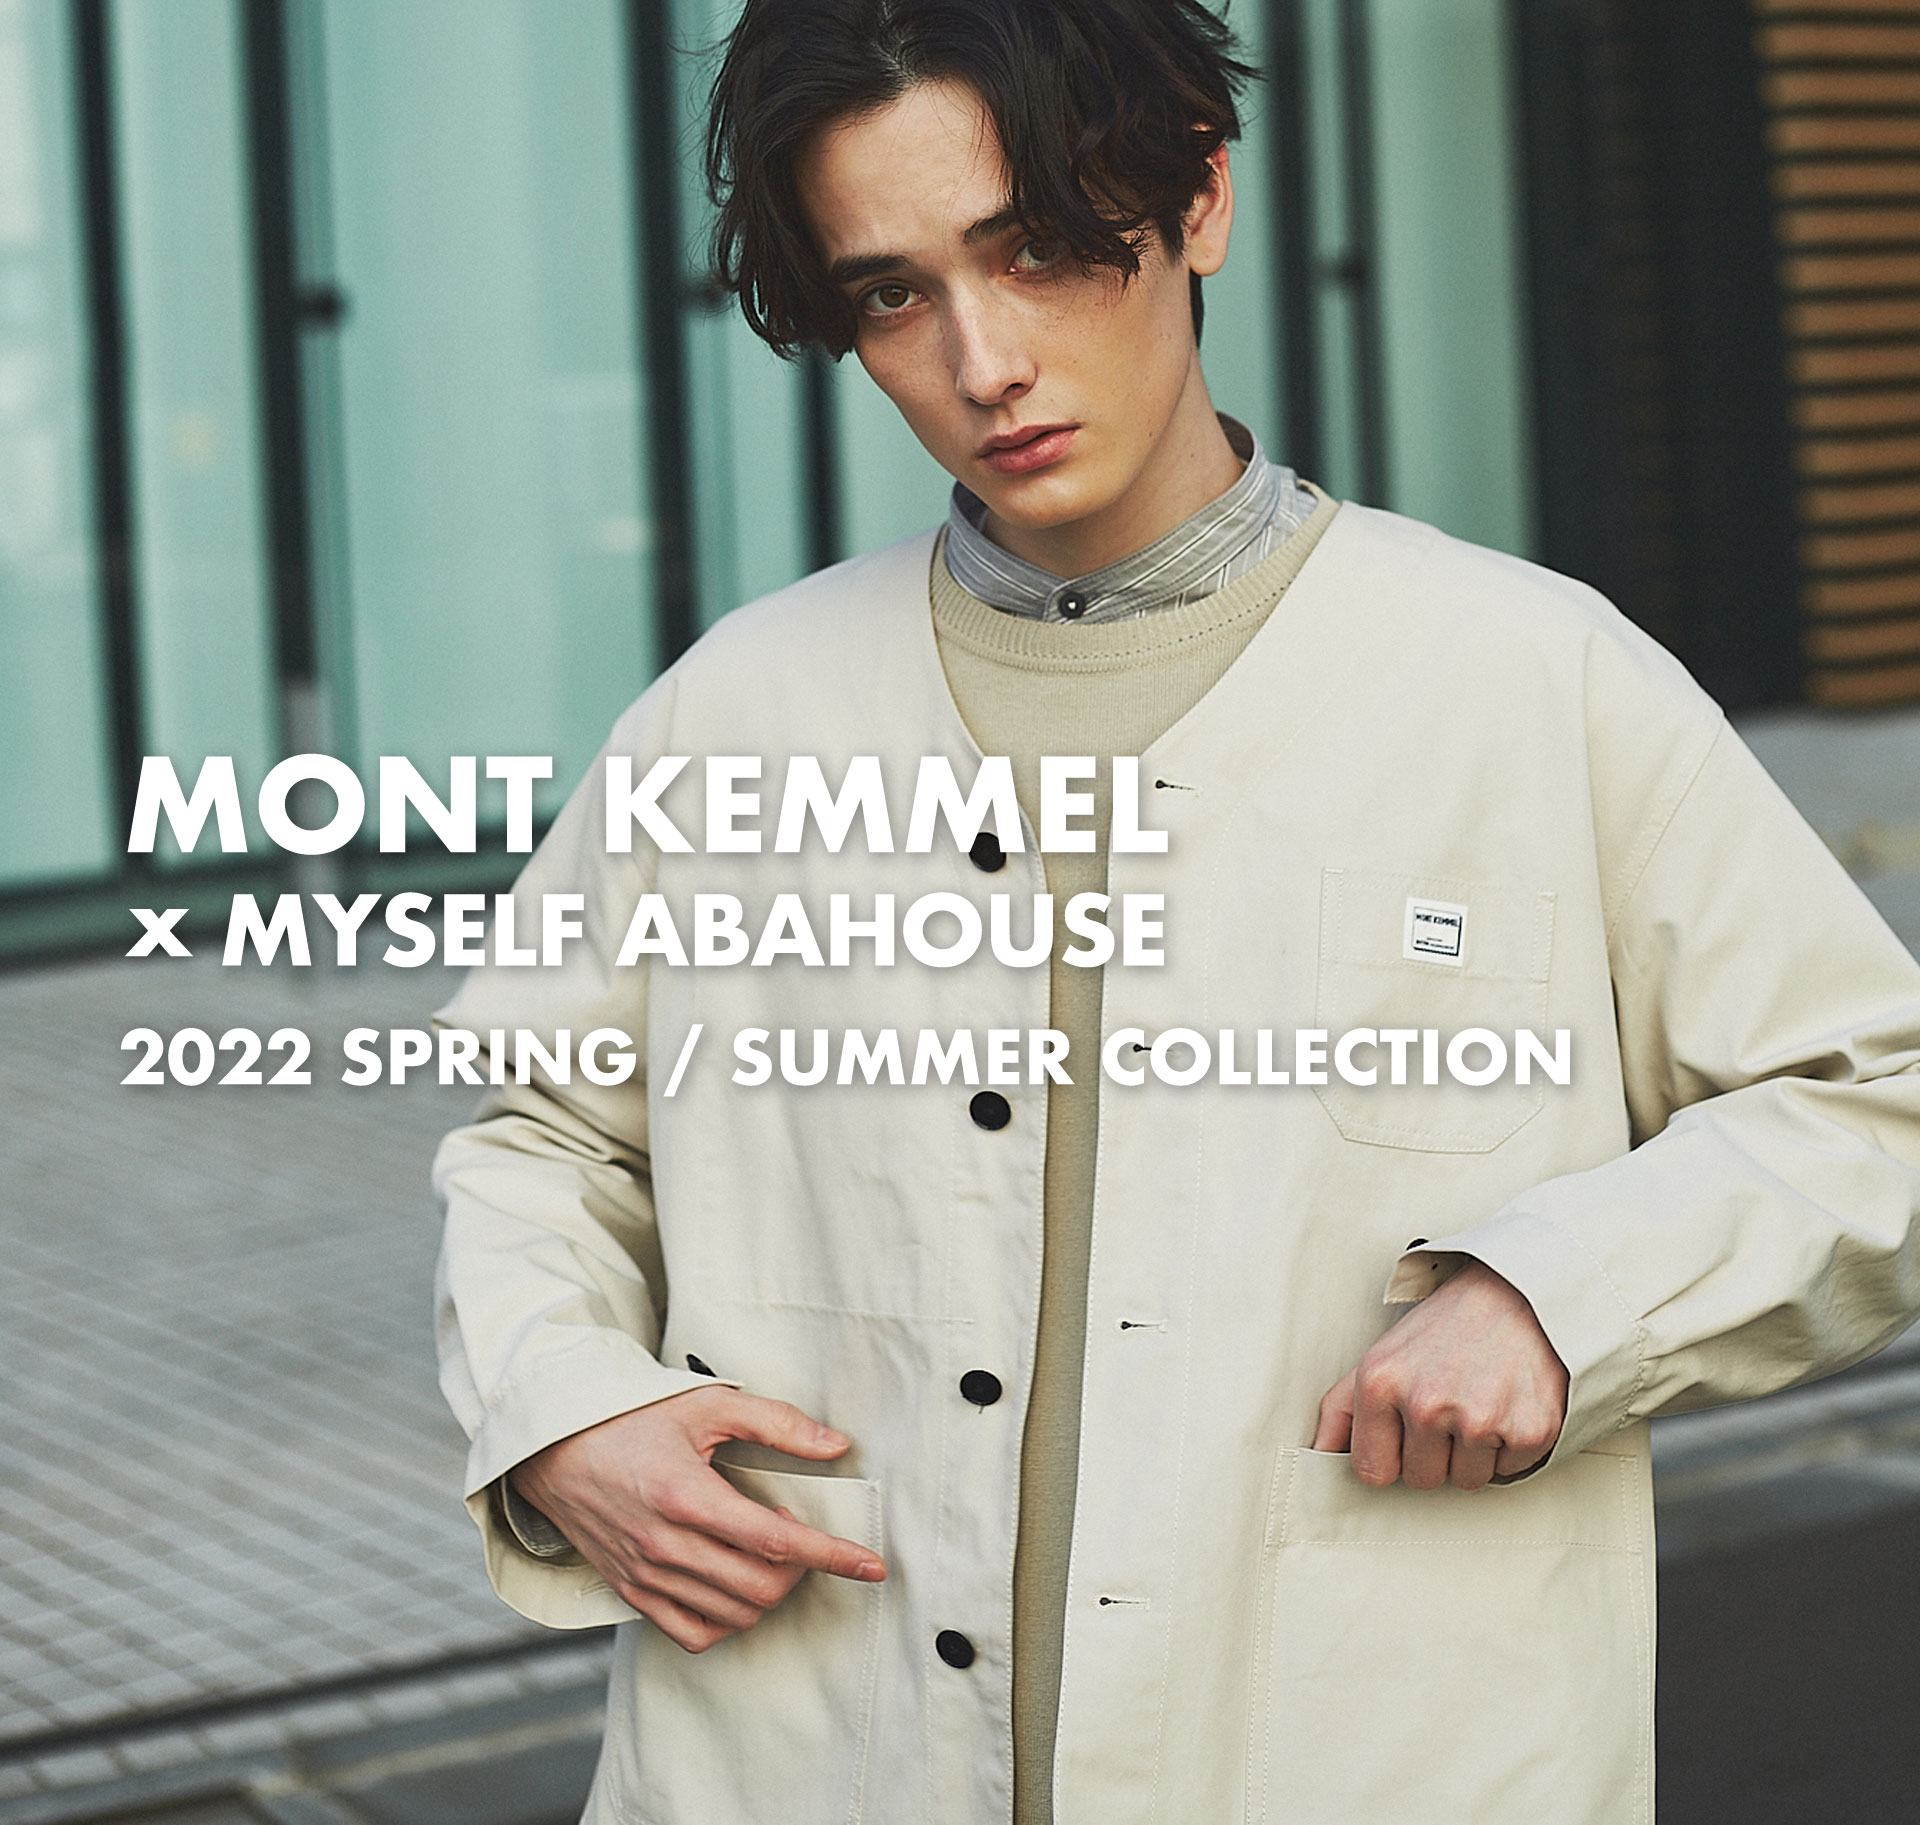 MONT KEMMEL x MYSELF ABAHOUSE | 2022 SPRING/SUMMER COLLECTION